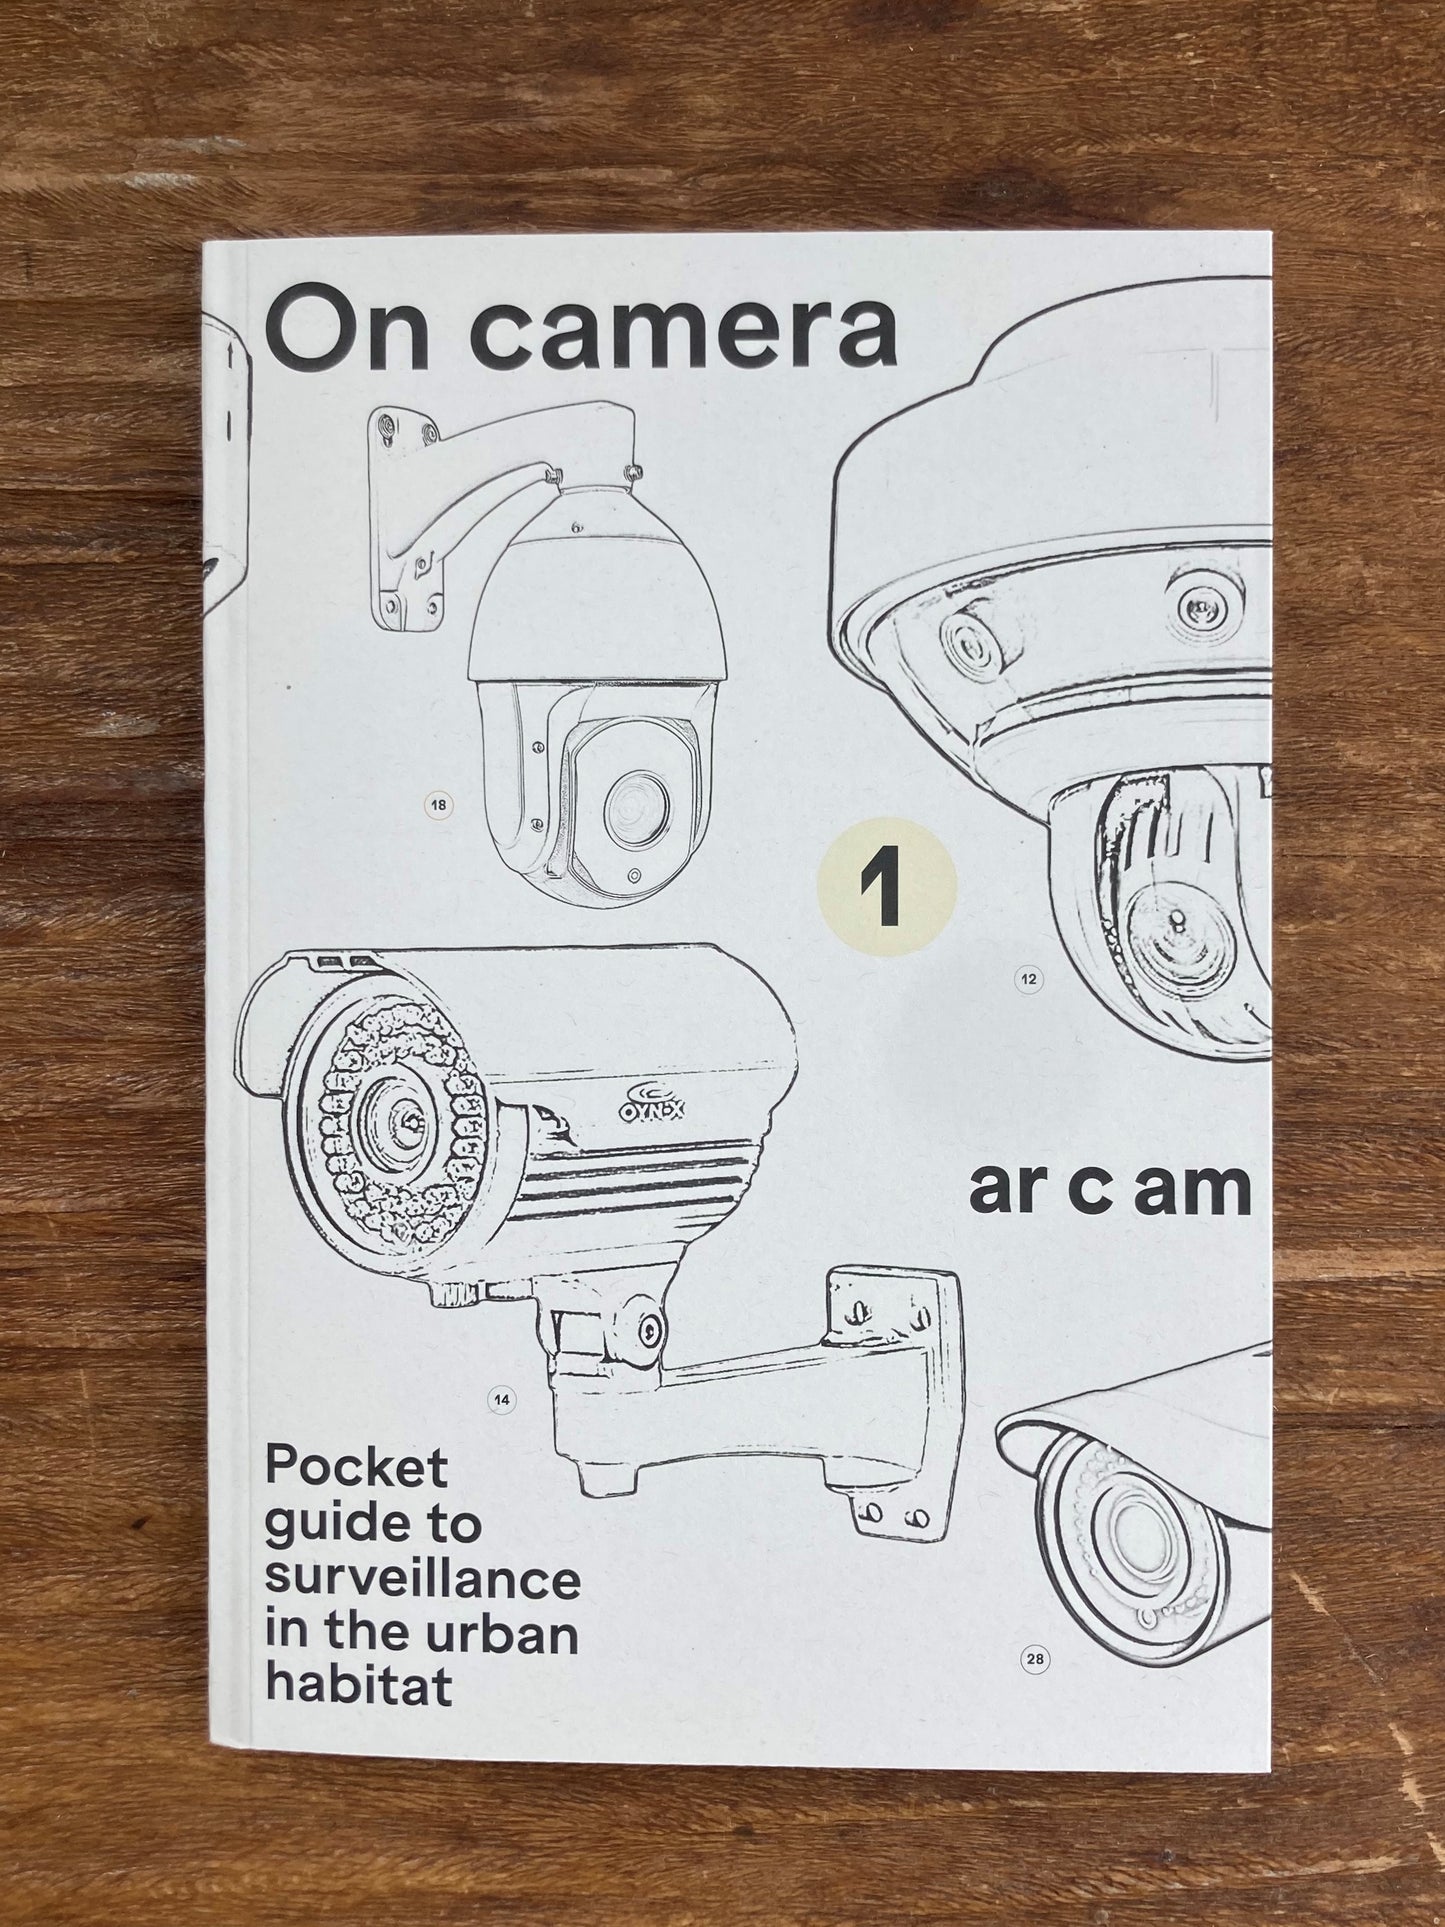 On camera - Pocket guide to surveillance in the urban habitat